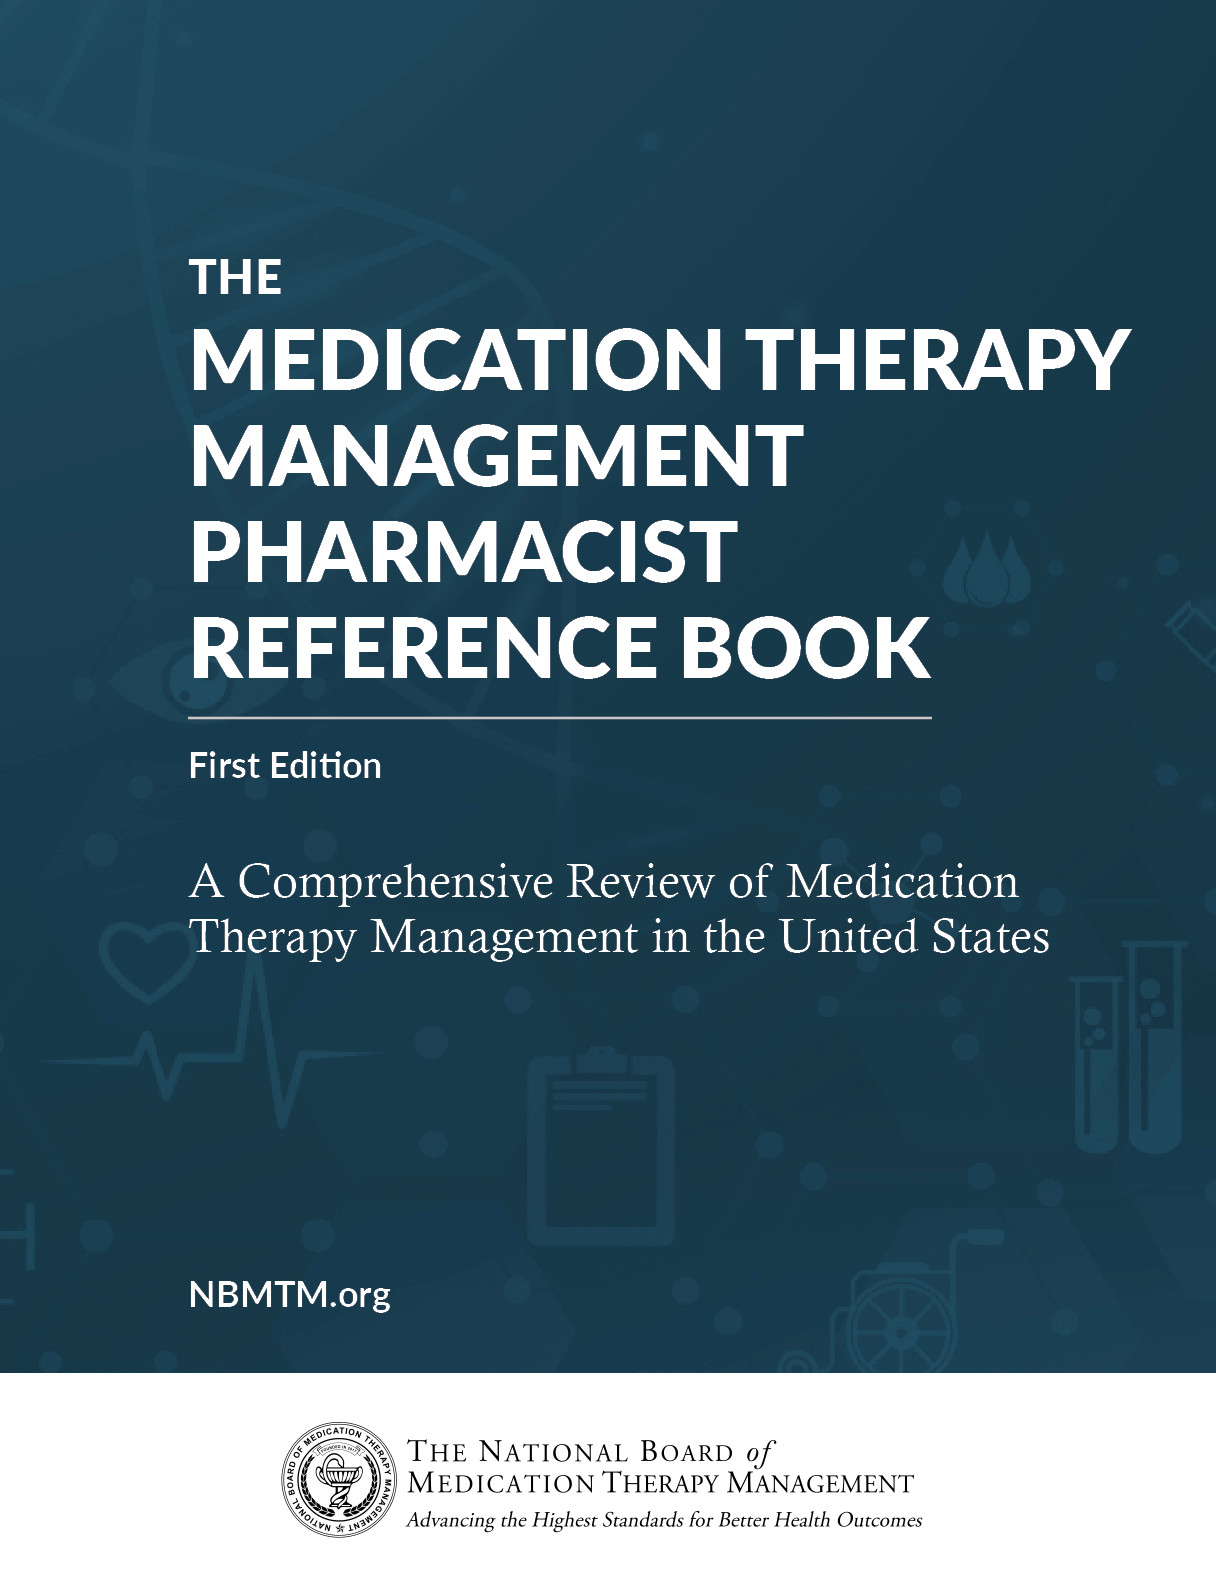 mtm-training-resources-national-board-of-medication-therapy-management